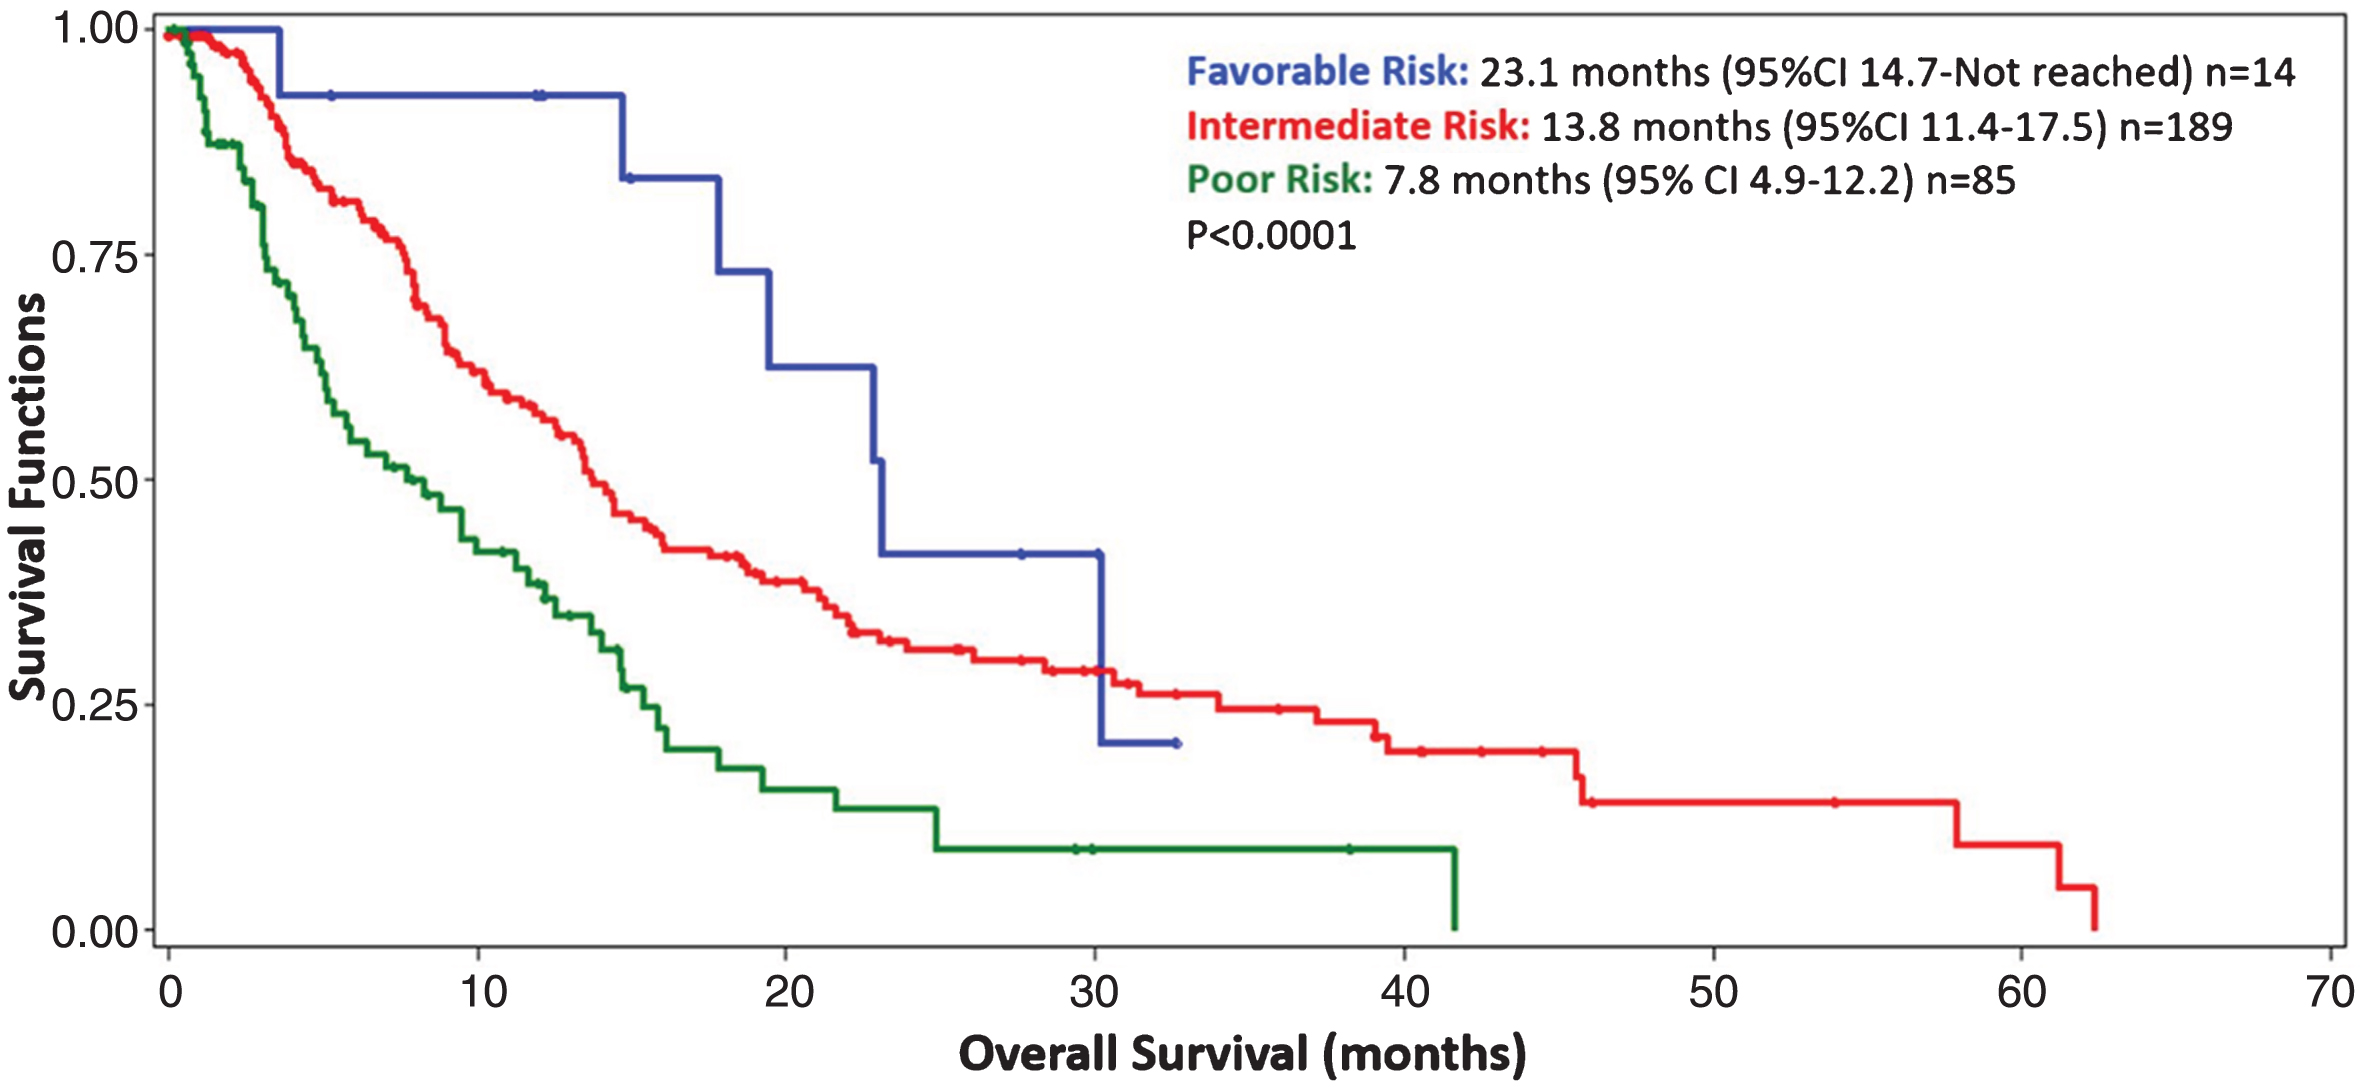 Kaplan Meier curve depicting the overall survival from the initiation of fourth-line targeted therapy for 288 metastatic renal cell carcinoma patients with complete prognostic information. Blue = favorable risk (5%), Red = intermediate risk (66%), Green = poor risk (29%). Patients were stratified by IMDC prognostic categories: 0 factors = favorable risk, 1-2 factors = intermediate risk, 3–6 factors = poor risk. CI = confidence interval.